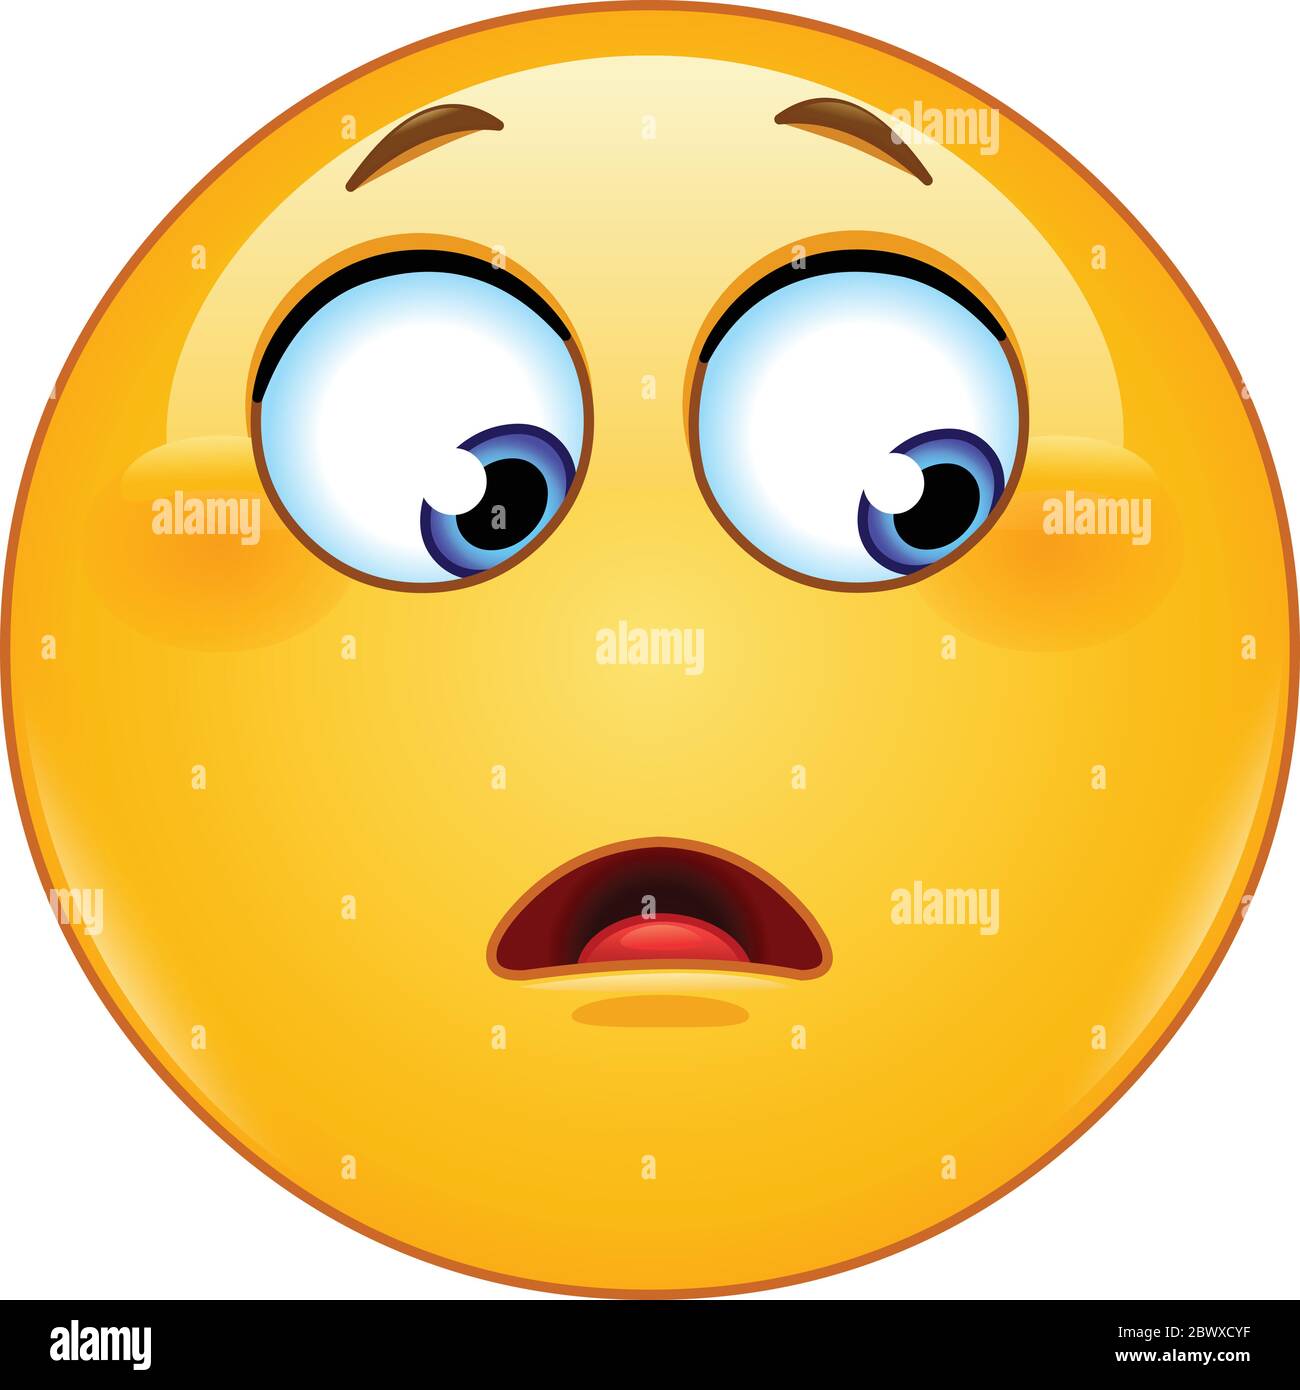 Emoji emoticon with a wonder or surprised expression looking to the side Stock Vector